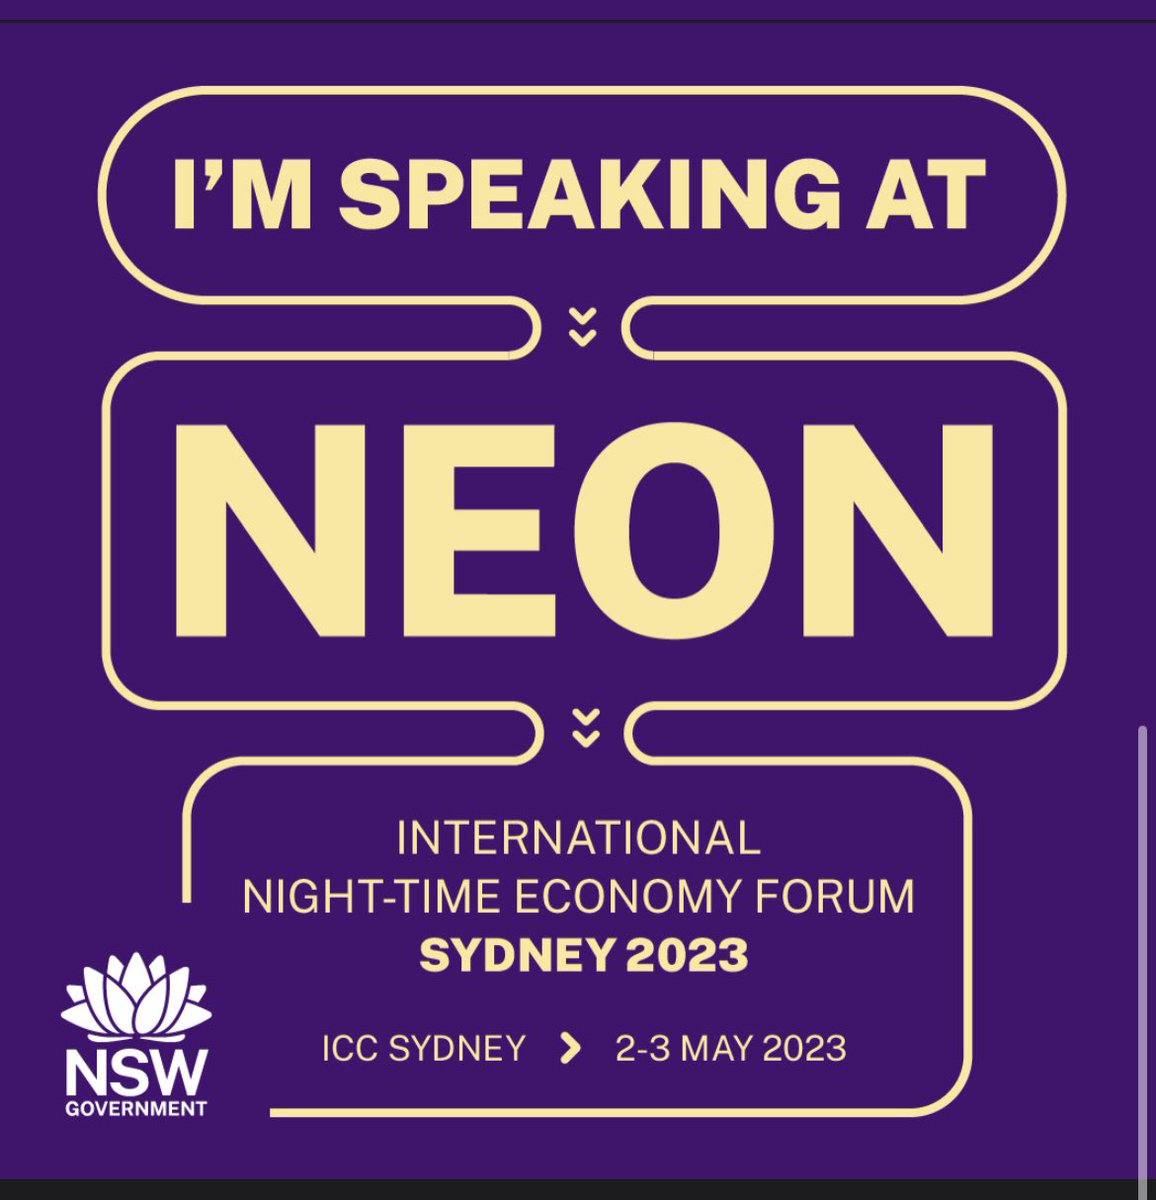 I’m excited to be speaking alongside thought leaders from around the world. The agenda is jam-packed, so looking forward to sharing ideas and innovations around the best global night-time economy initiatives at the NEON forum #NEONSYDNEY2023